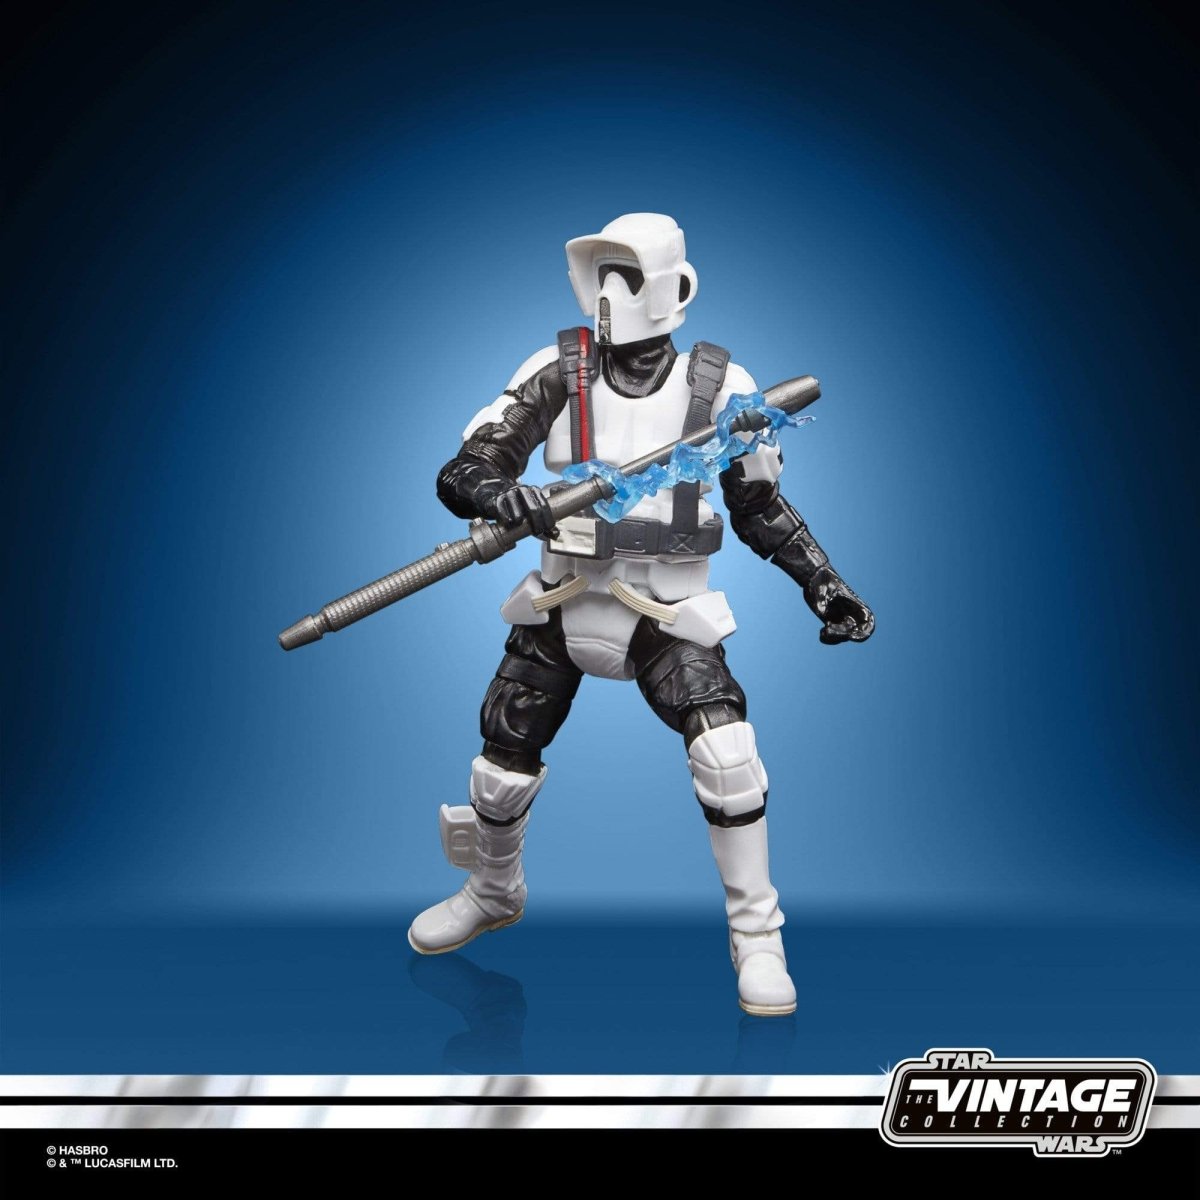 Star Wars Gaming Greats Shock Scout Trooper The Vintage Collection 3 3/4" scale figure - Pop-O-Loco - Hasbro